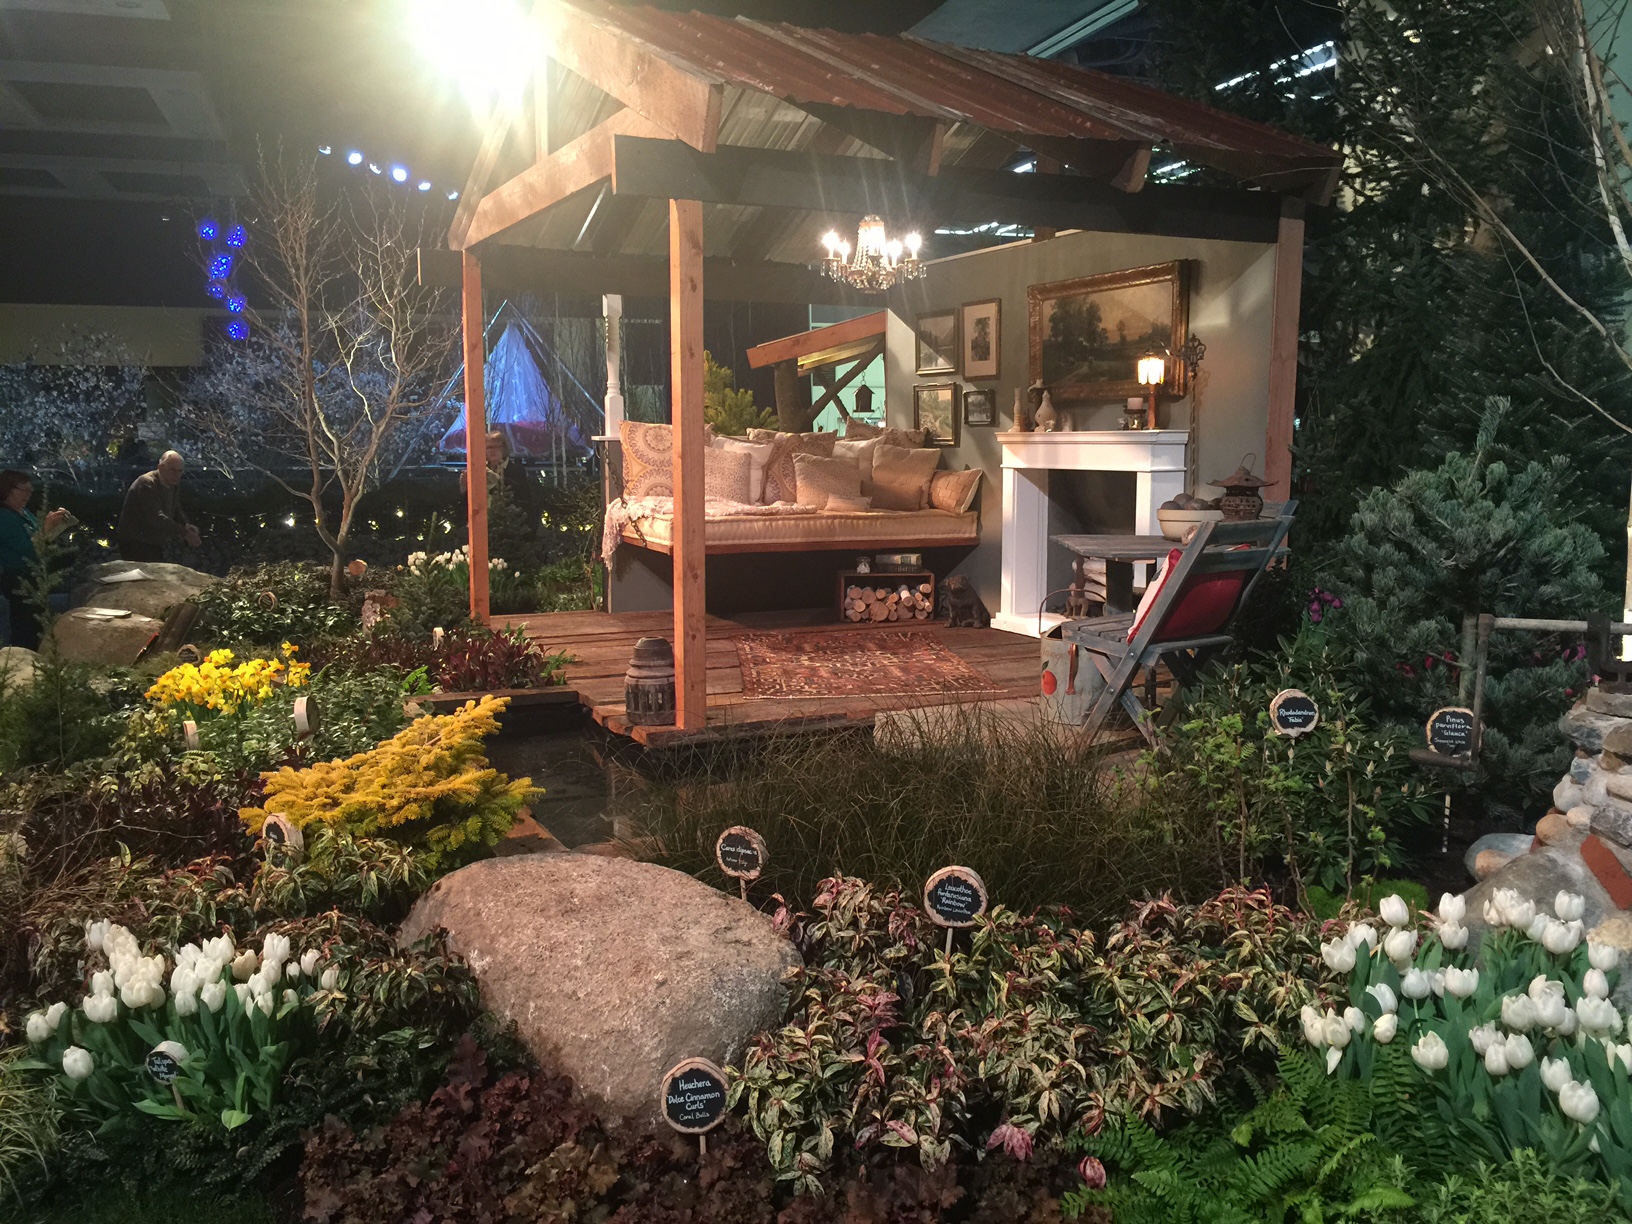 Snapshots from the gardens at the Northwest Flower and Garden Show